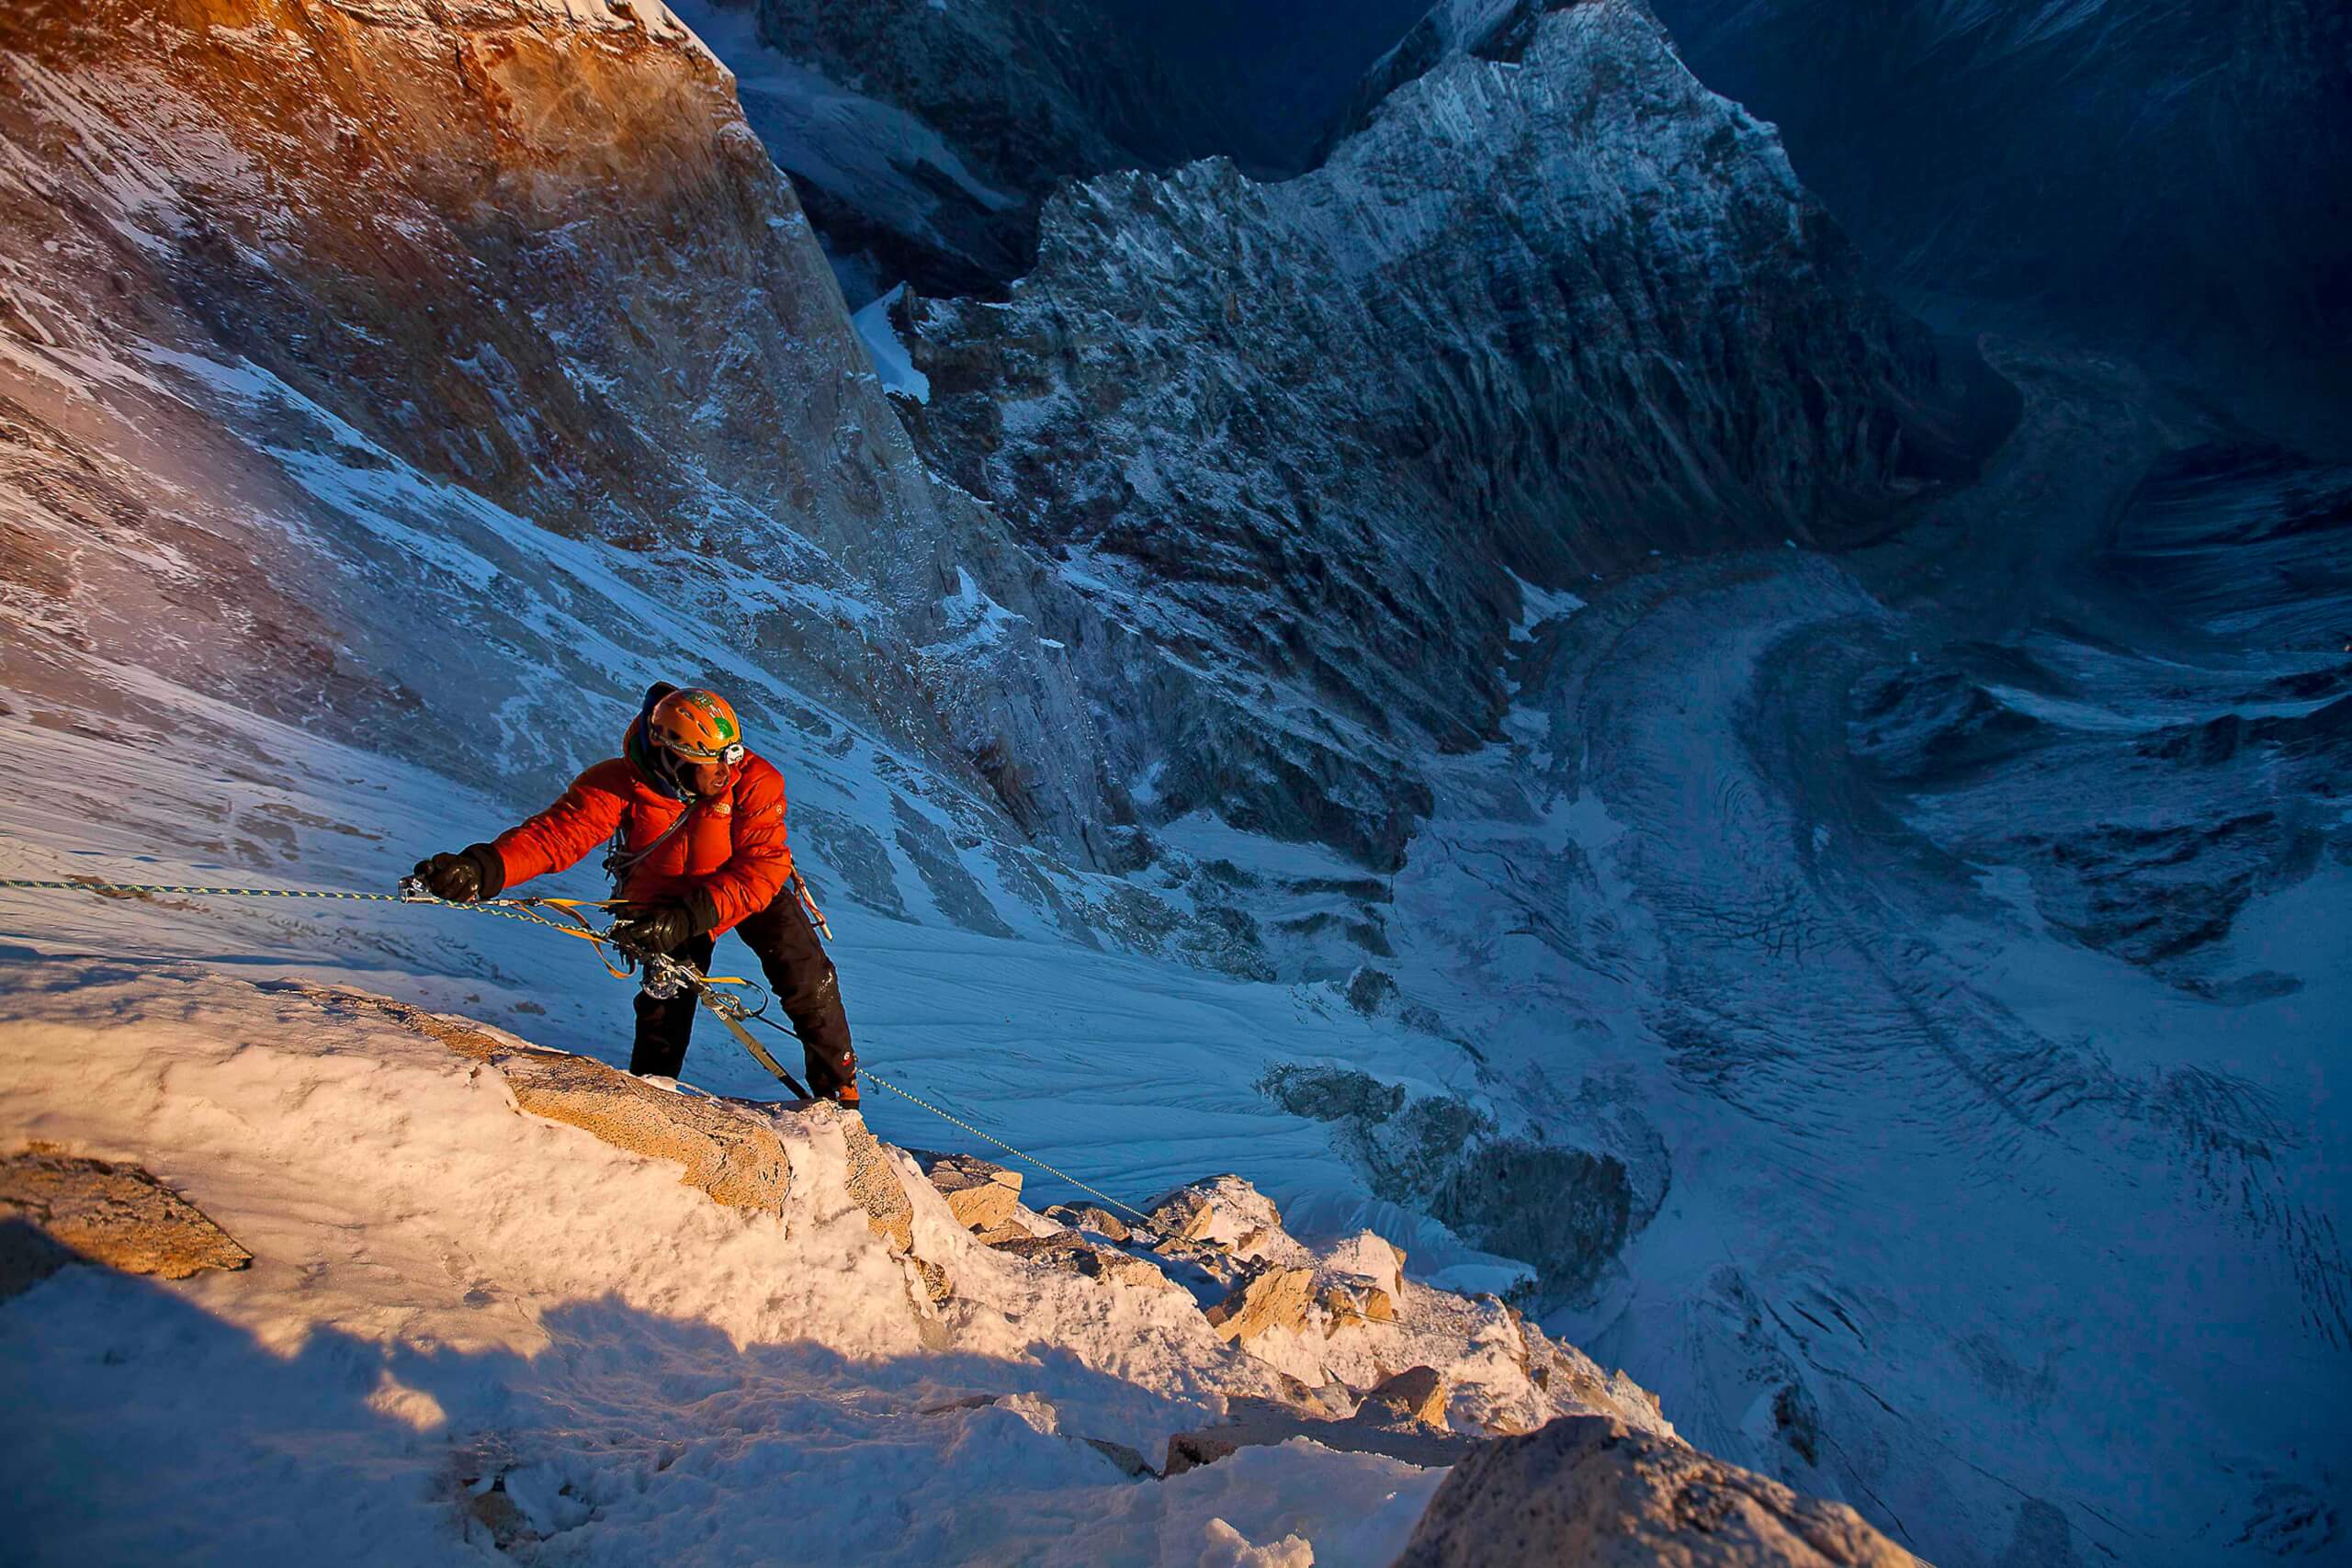 Jimmy Chin at first light on the 11th day of climbing. This was the summit day push.